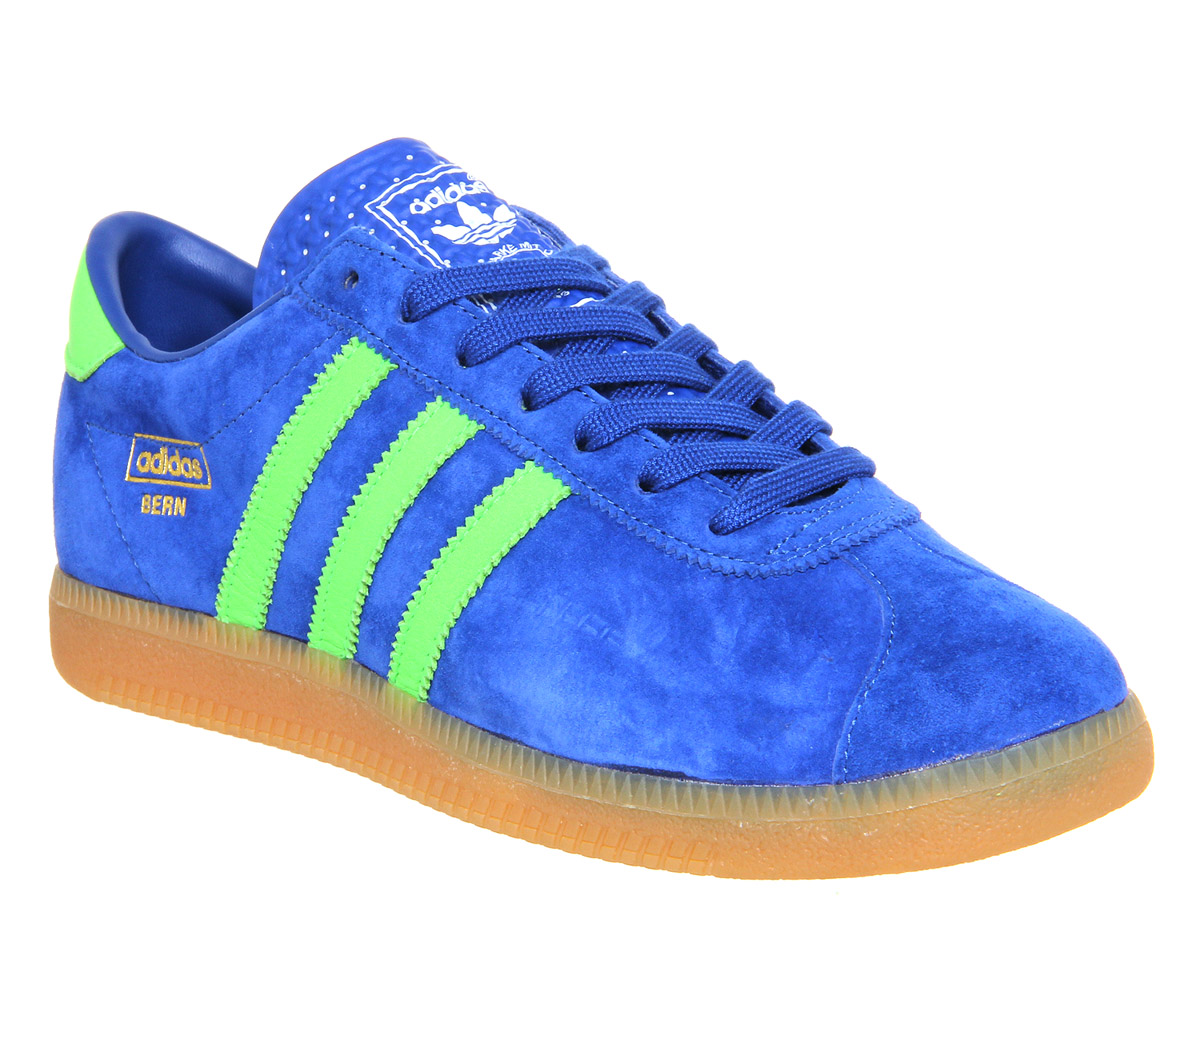 adidas Bern Blue Green - His trainers